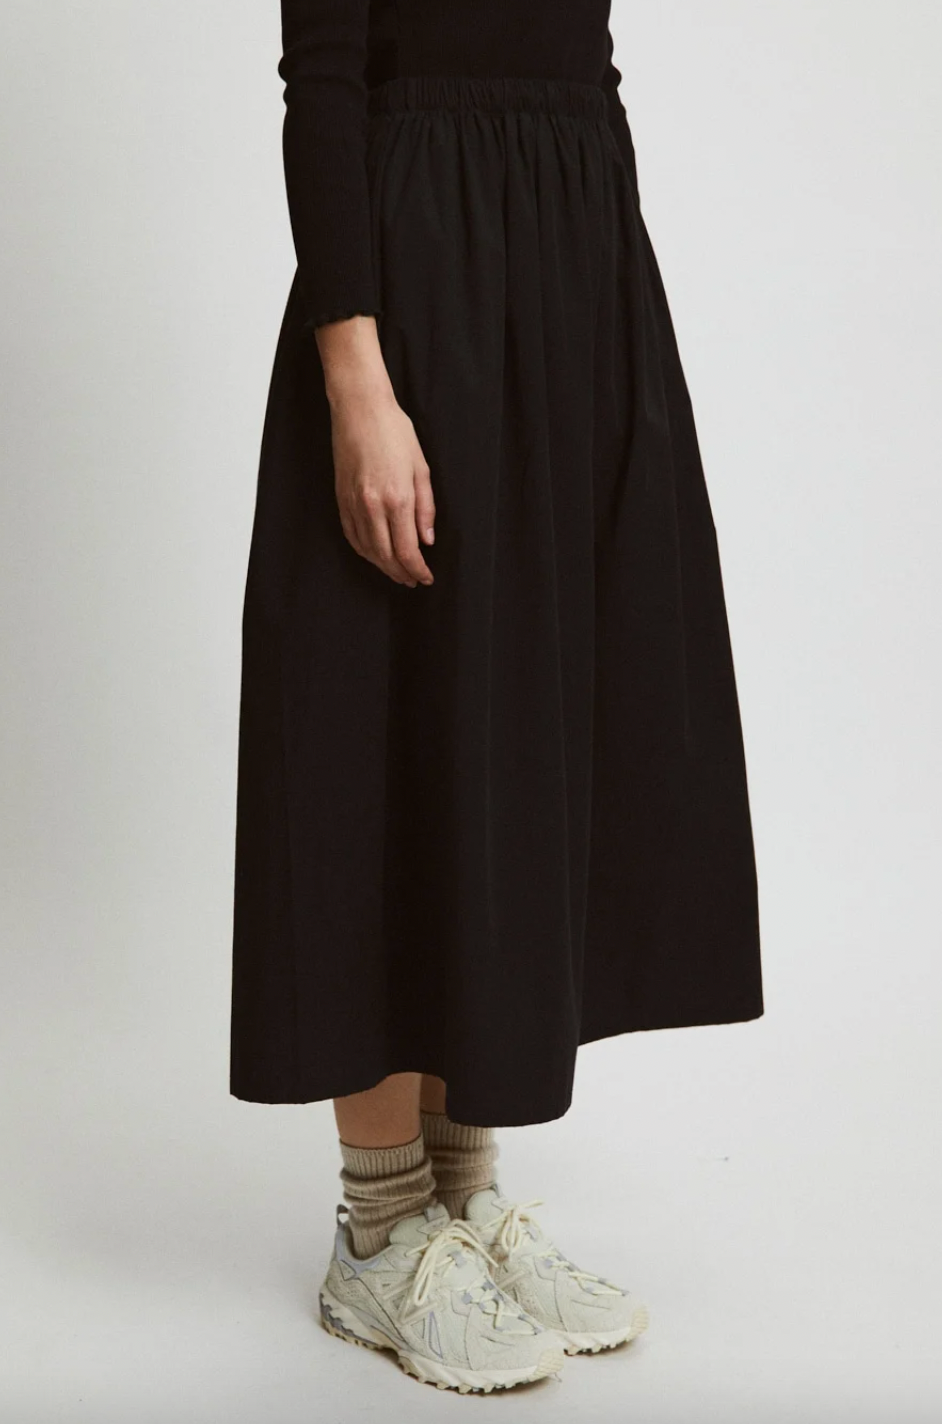 Product Image for Fisher Skirt, Black